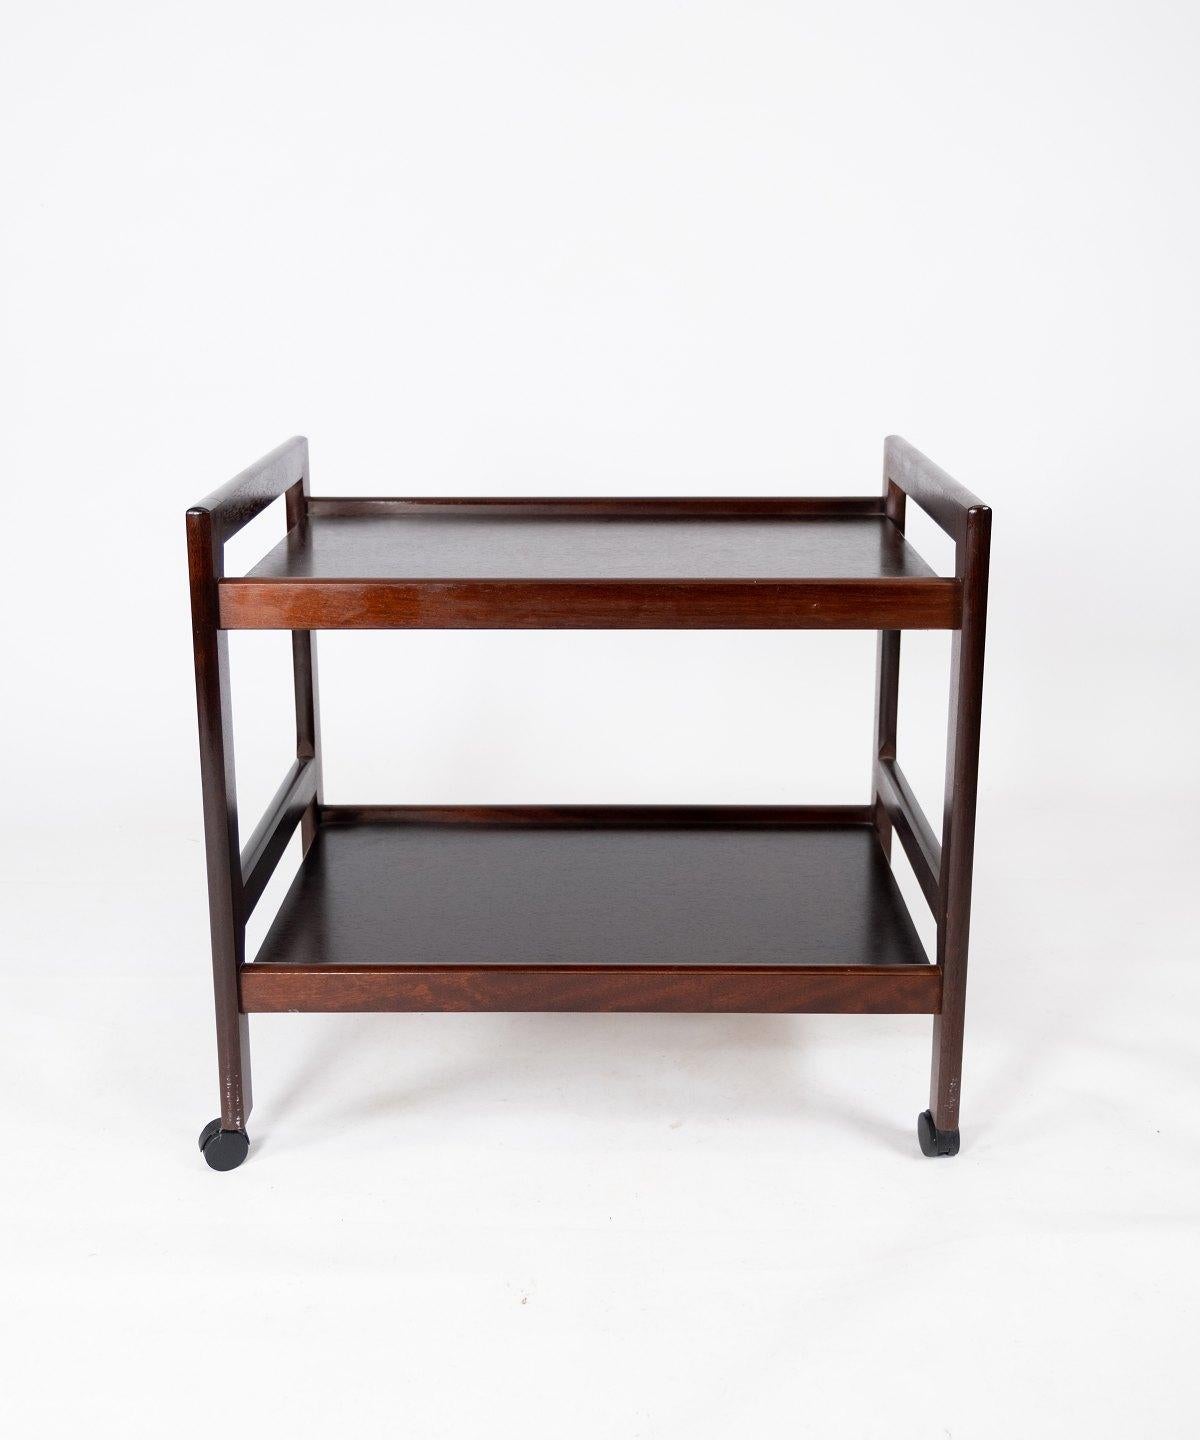 Trolley table in mahogany of Danish design from the 1960s. The table is in great vintage condition.